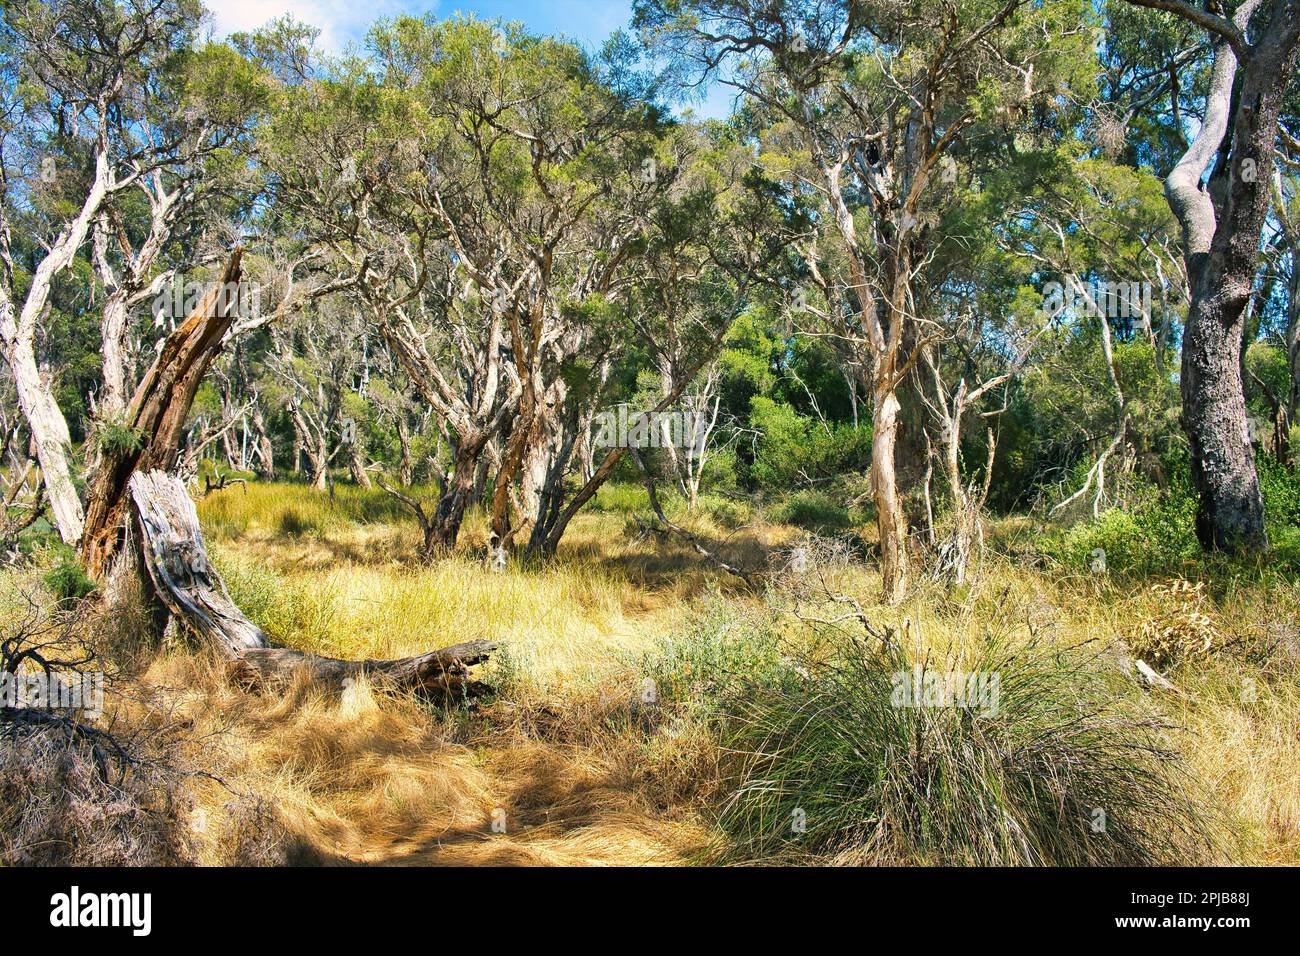 Forest with swamp paperbarks (Melaleuca ericifolia) and an undergrowth of grasses in Leschenault Peninsula near Australind, Western Australia Stock Photo